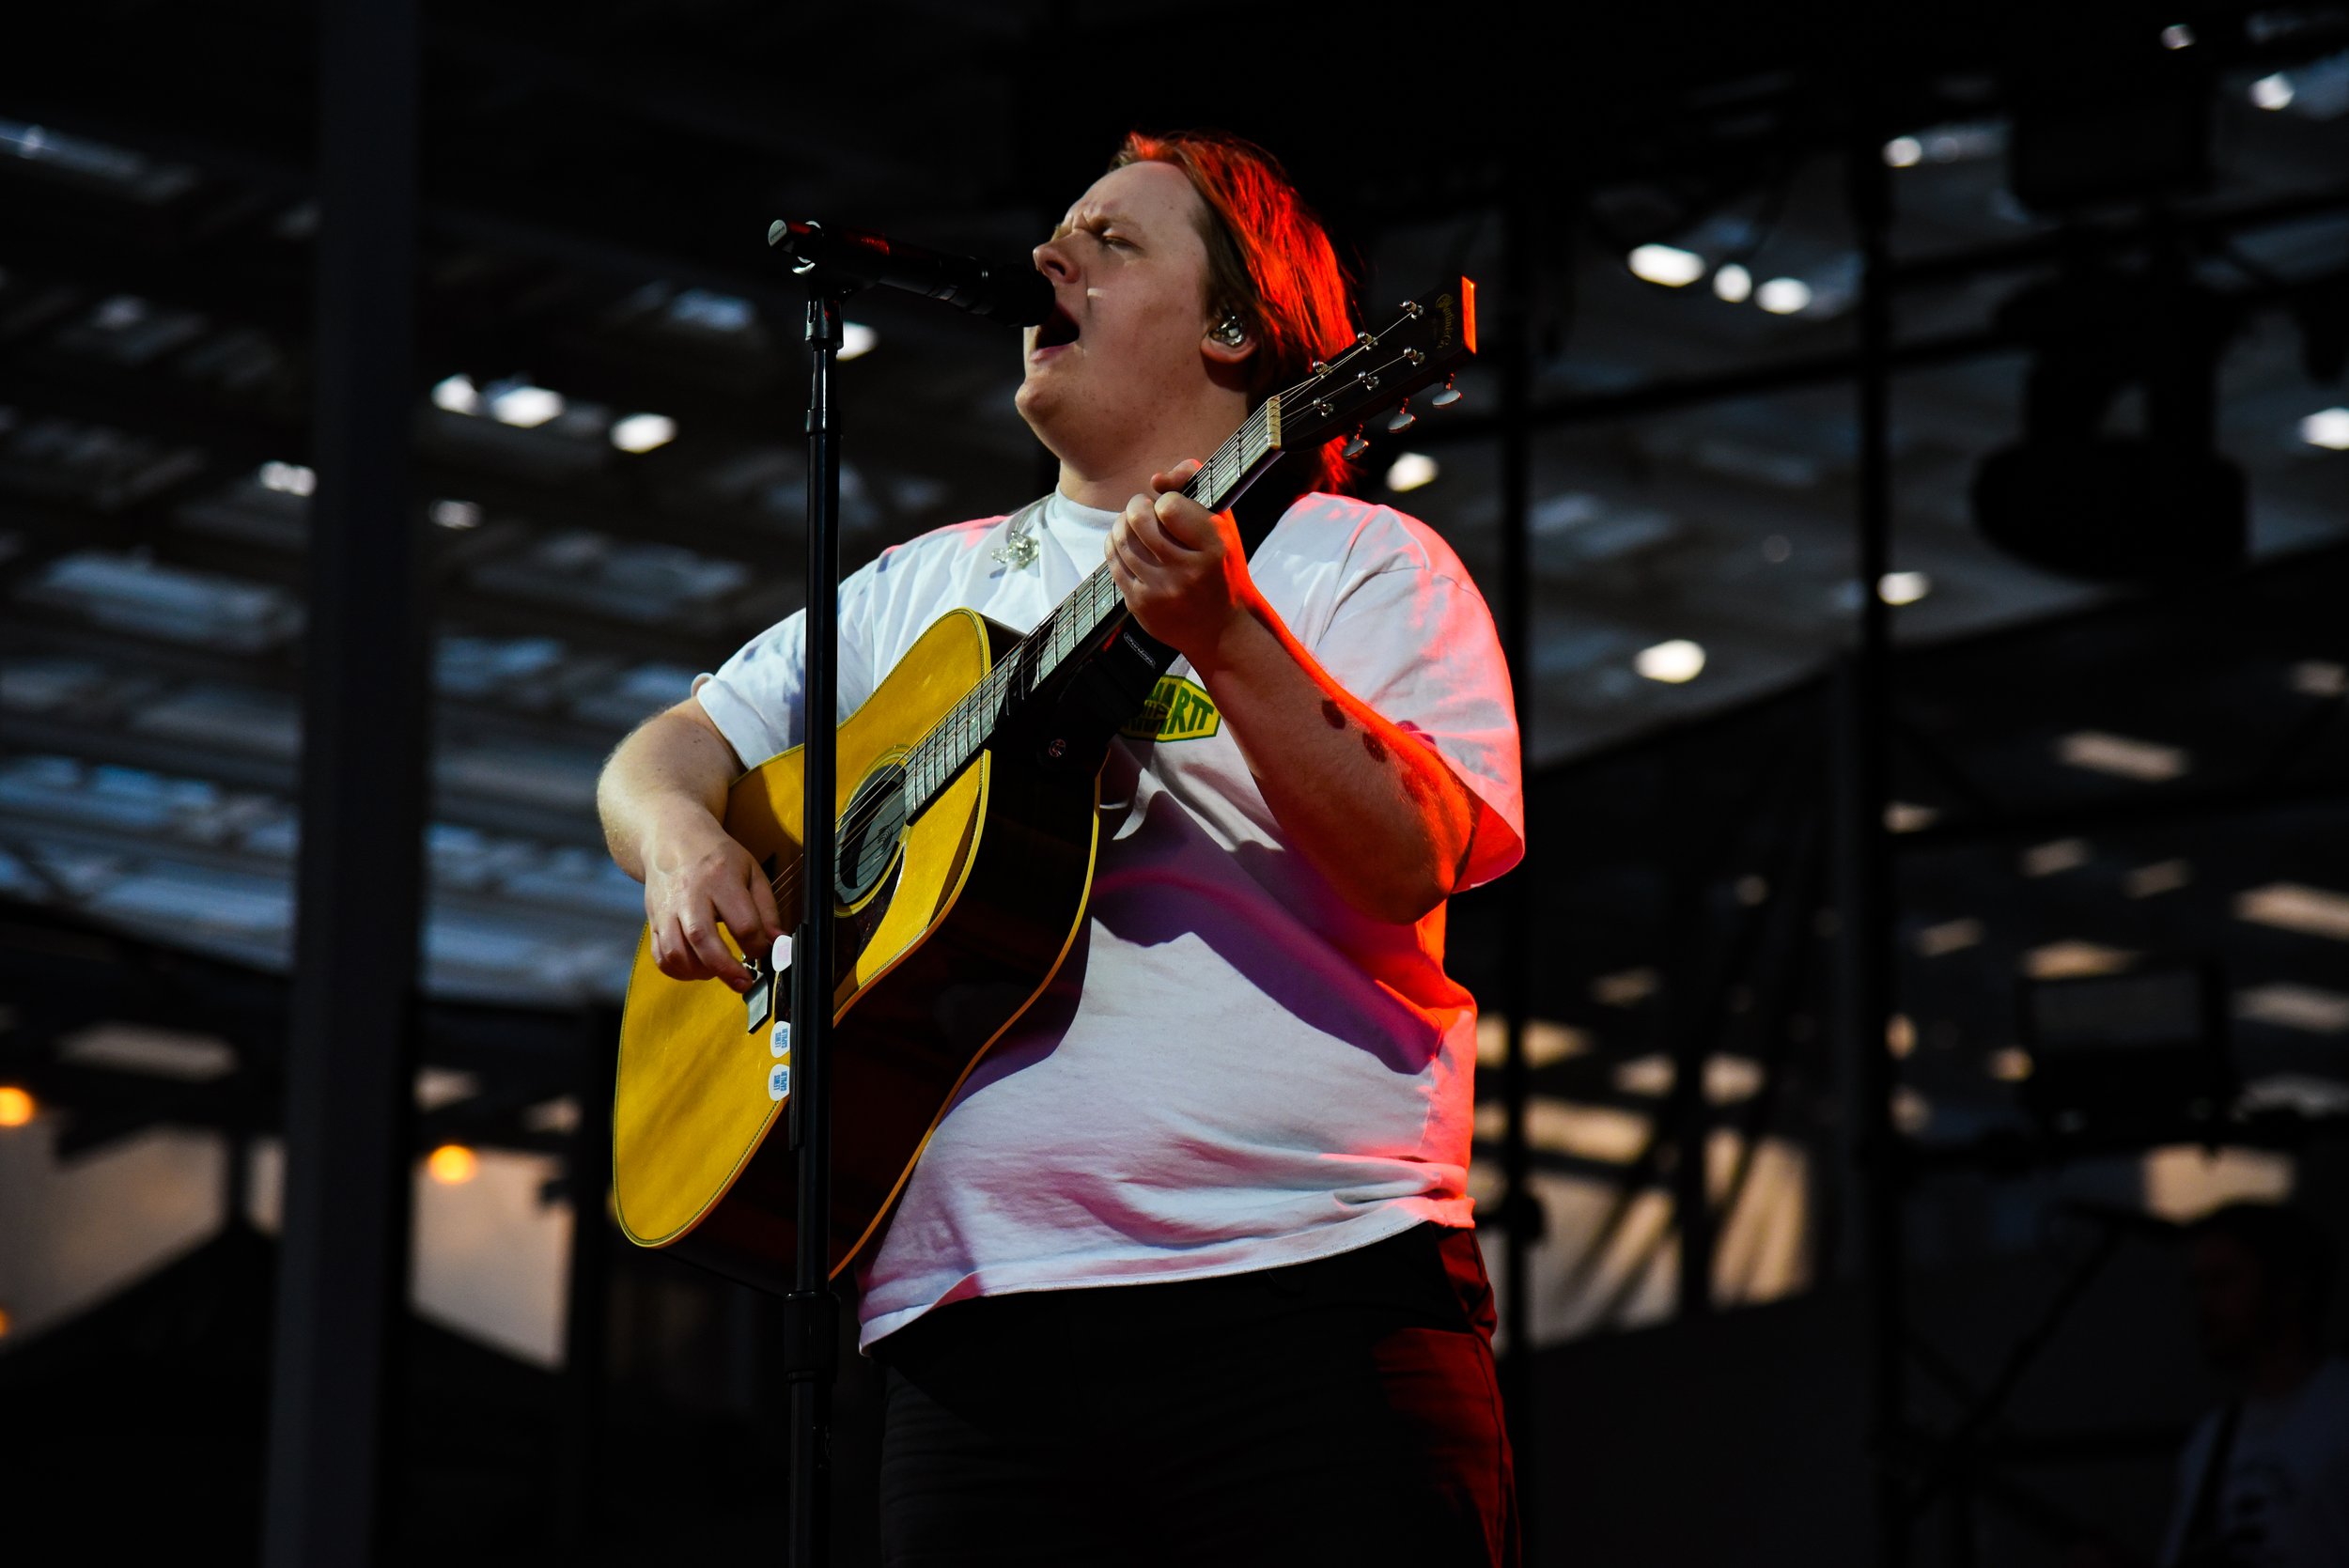  For the second song of his set, Lewis Capaldi brings out an acoustic guitar. 